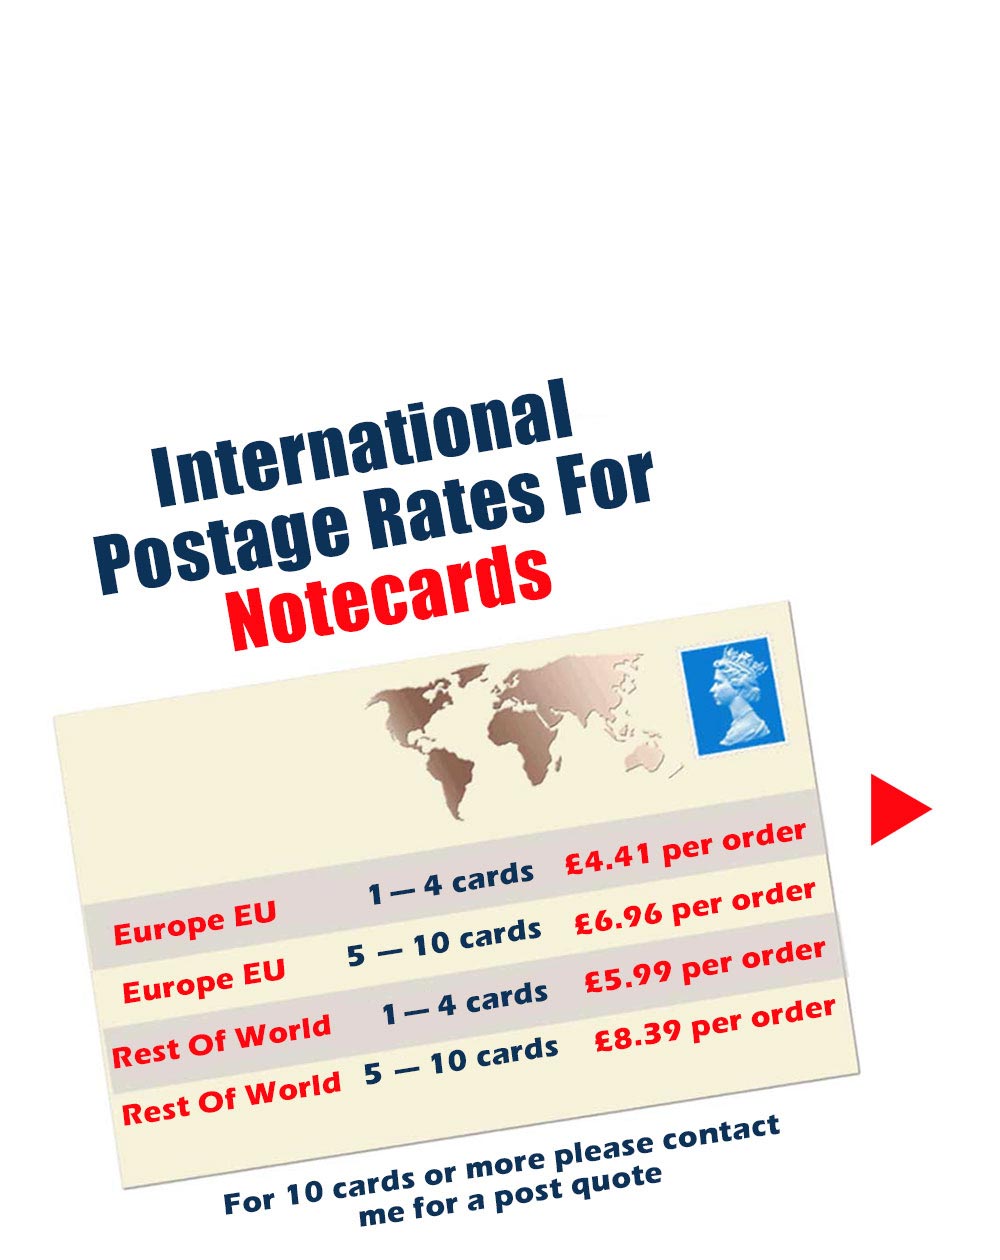 Postage Rates: Europe 1-4 cards £4.41 per order, Europe 5-10 cards £6.96 per order. Rest Of Worls 1-4 cards £5.99 per order, Rest Of World 5-10 cards £ 8.39 per order